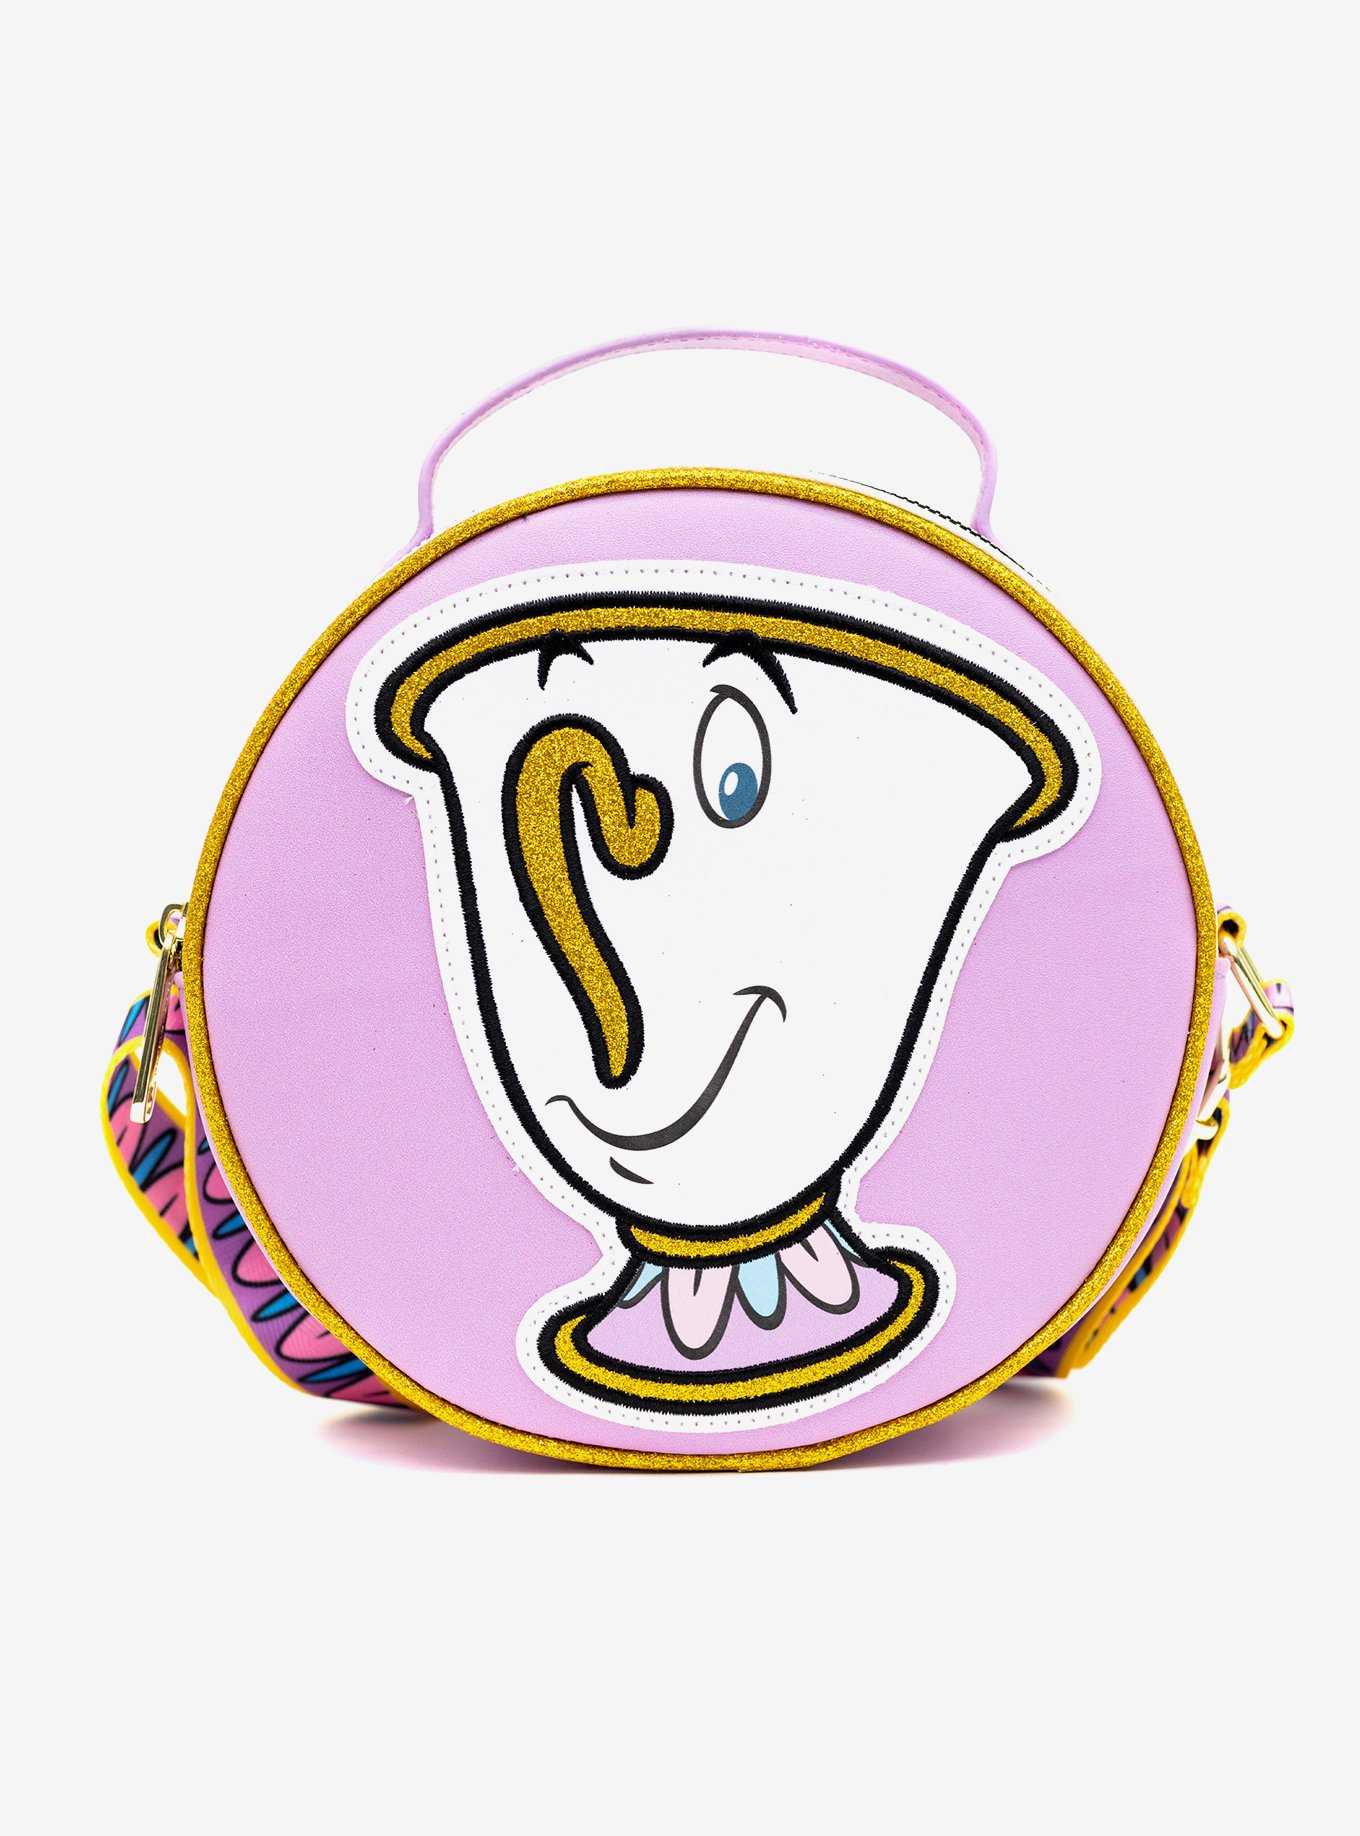 Buckle-Down Disney Beauty And The Beast Chip Crossbody Bag, , hi-res